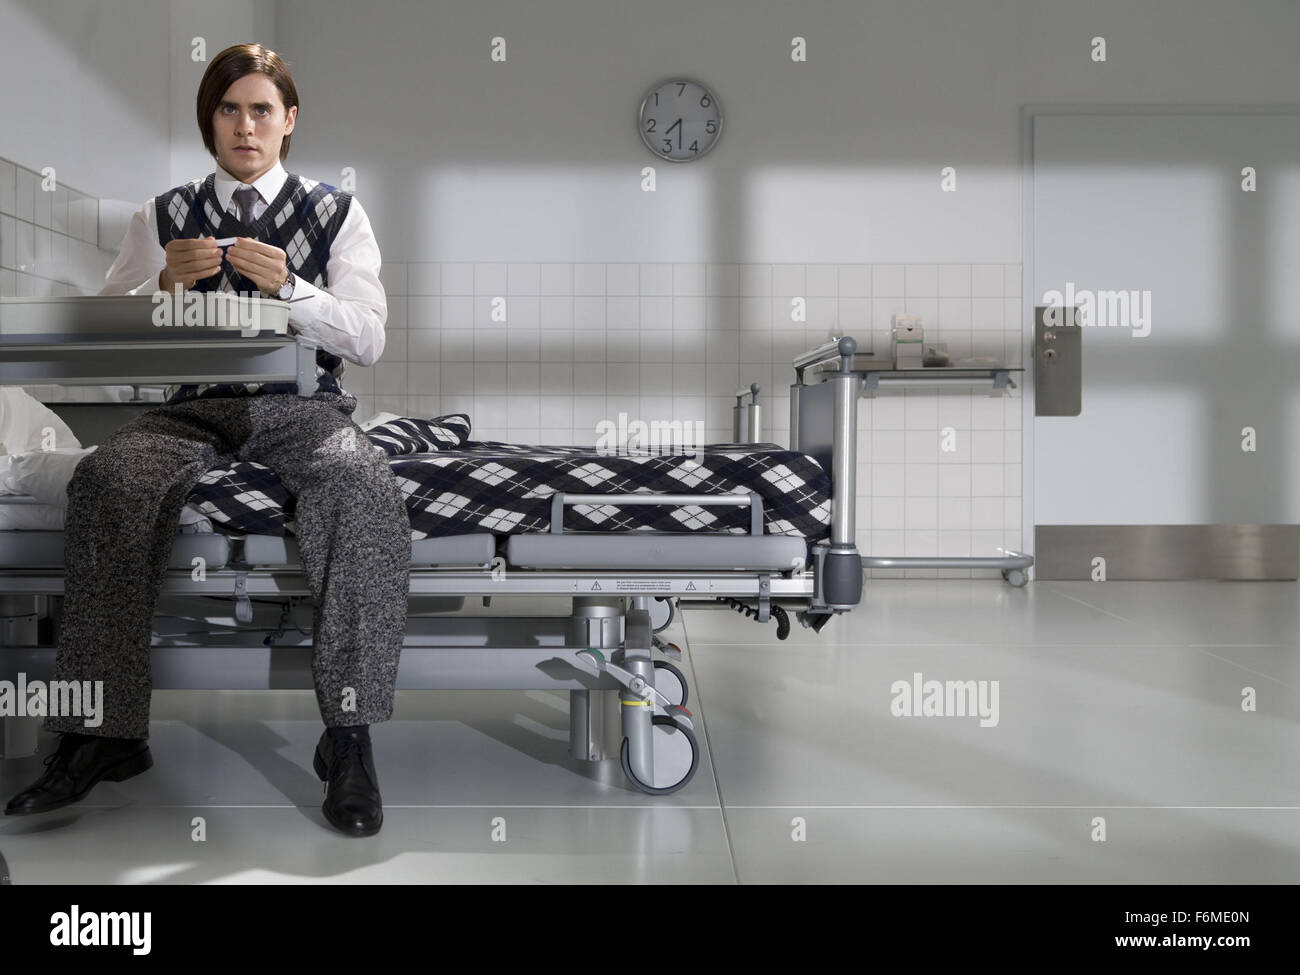 RELEASE DATE: September 18, 2009. MOVIE TITLE: Mr. Nobody. STUDIO: Virtual Films. PLOT: Nemo Nobody leads an ordinary existence at his wife's side, Elise, and their 3 children until the day when reality skids and he wakes up as an old man in the year 2092. At 120, Mr. Nobody is both the oldest man in the world and the last mortal of a new mankind where nobody dies anymore. But that doesn't seem to interest or bother him very much. The only questions that preoccupy him in the present is whether he lived the right life for himself, loved the woman whom he was supposed to love, and had the childr Stock Photo